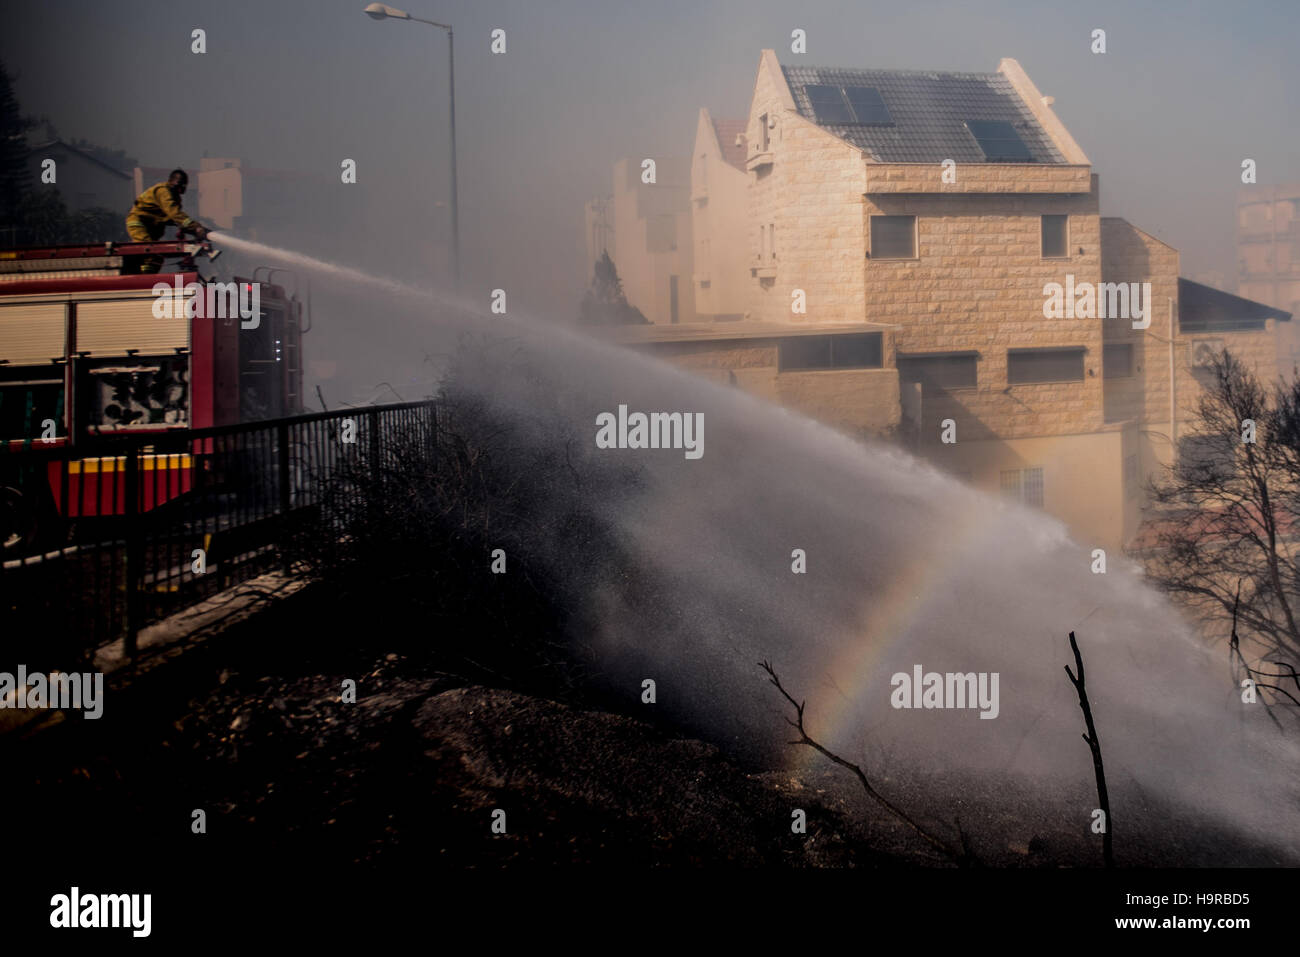 Haifa, Israel. 24th Nov, 2016. A firefighter tries to extinguish a fire in Haifa, Israel, Nov. 24, 2016. Fires on Thursday forced a widespread evacuation in Haifa. Tens of thousands of residents were forced to evacuate from around 11 neighborhoods in Haifa, along with Haifa University and many businesses. © Moran Mayan/JINI/Xinhua/Alamy Live News Stock Photo